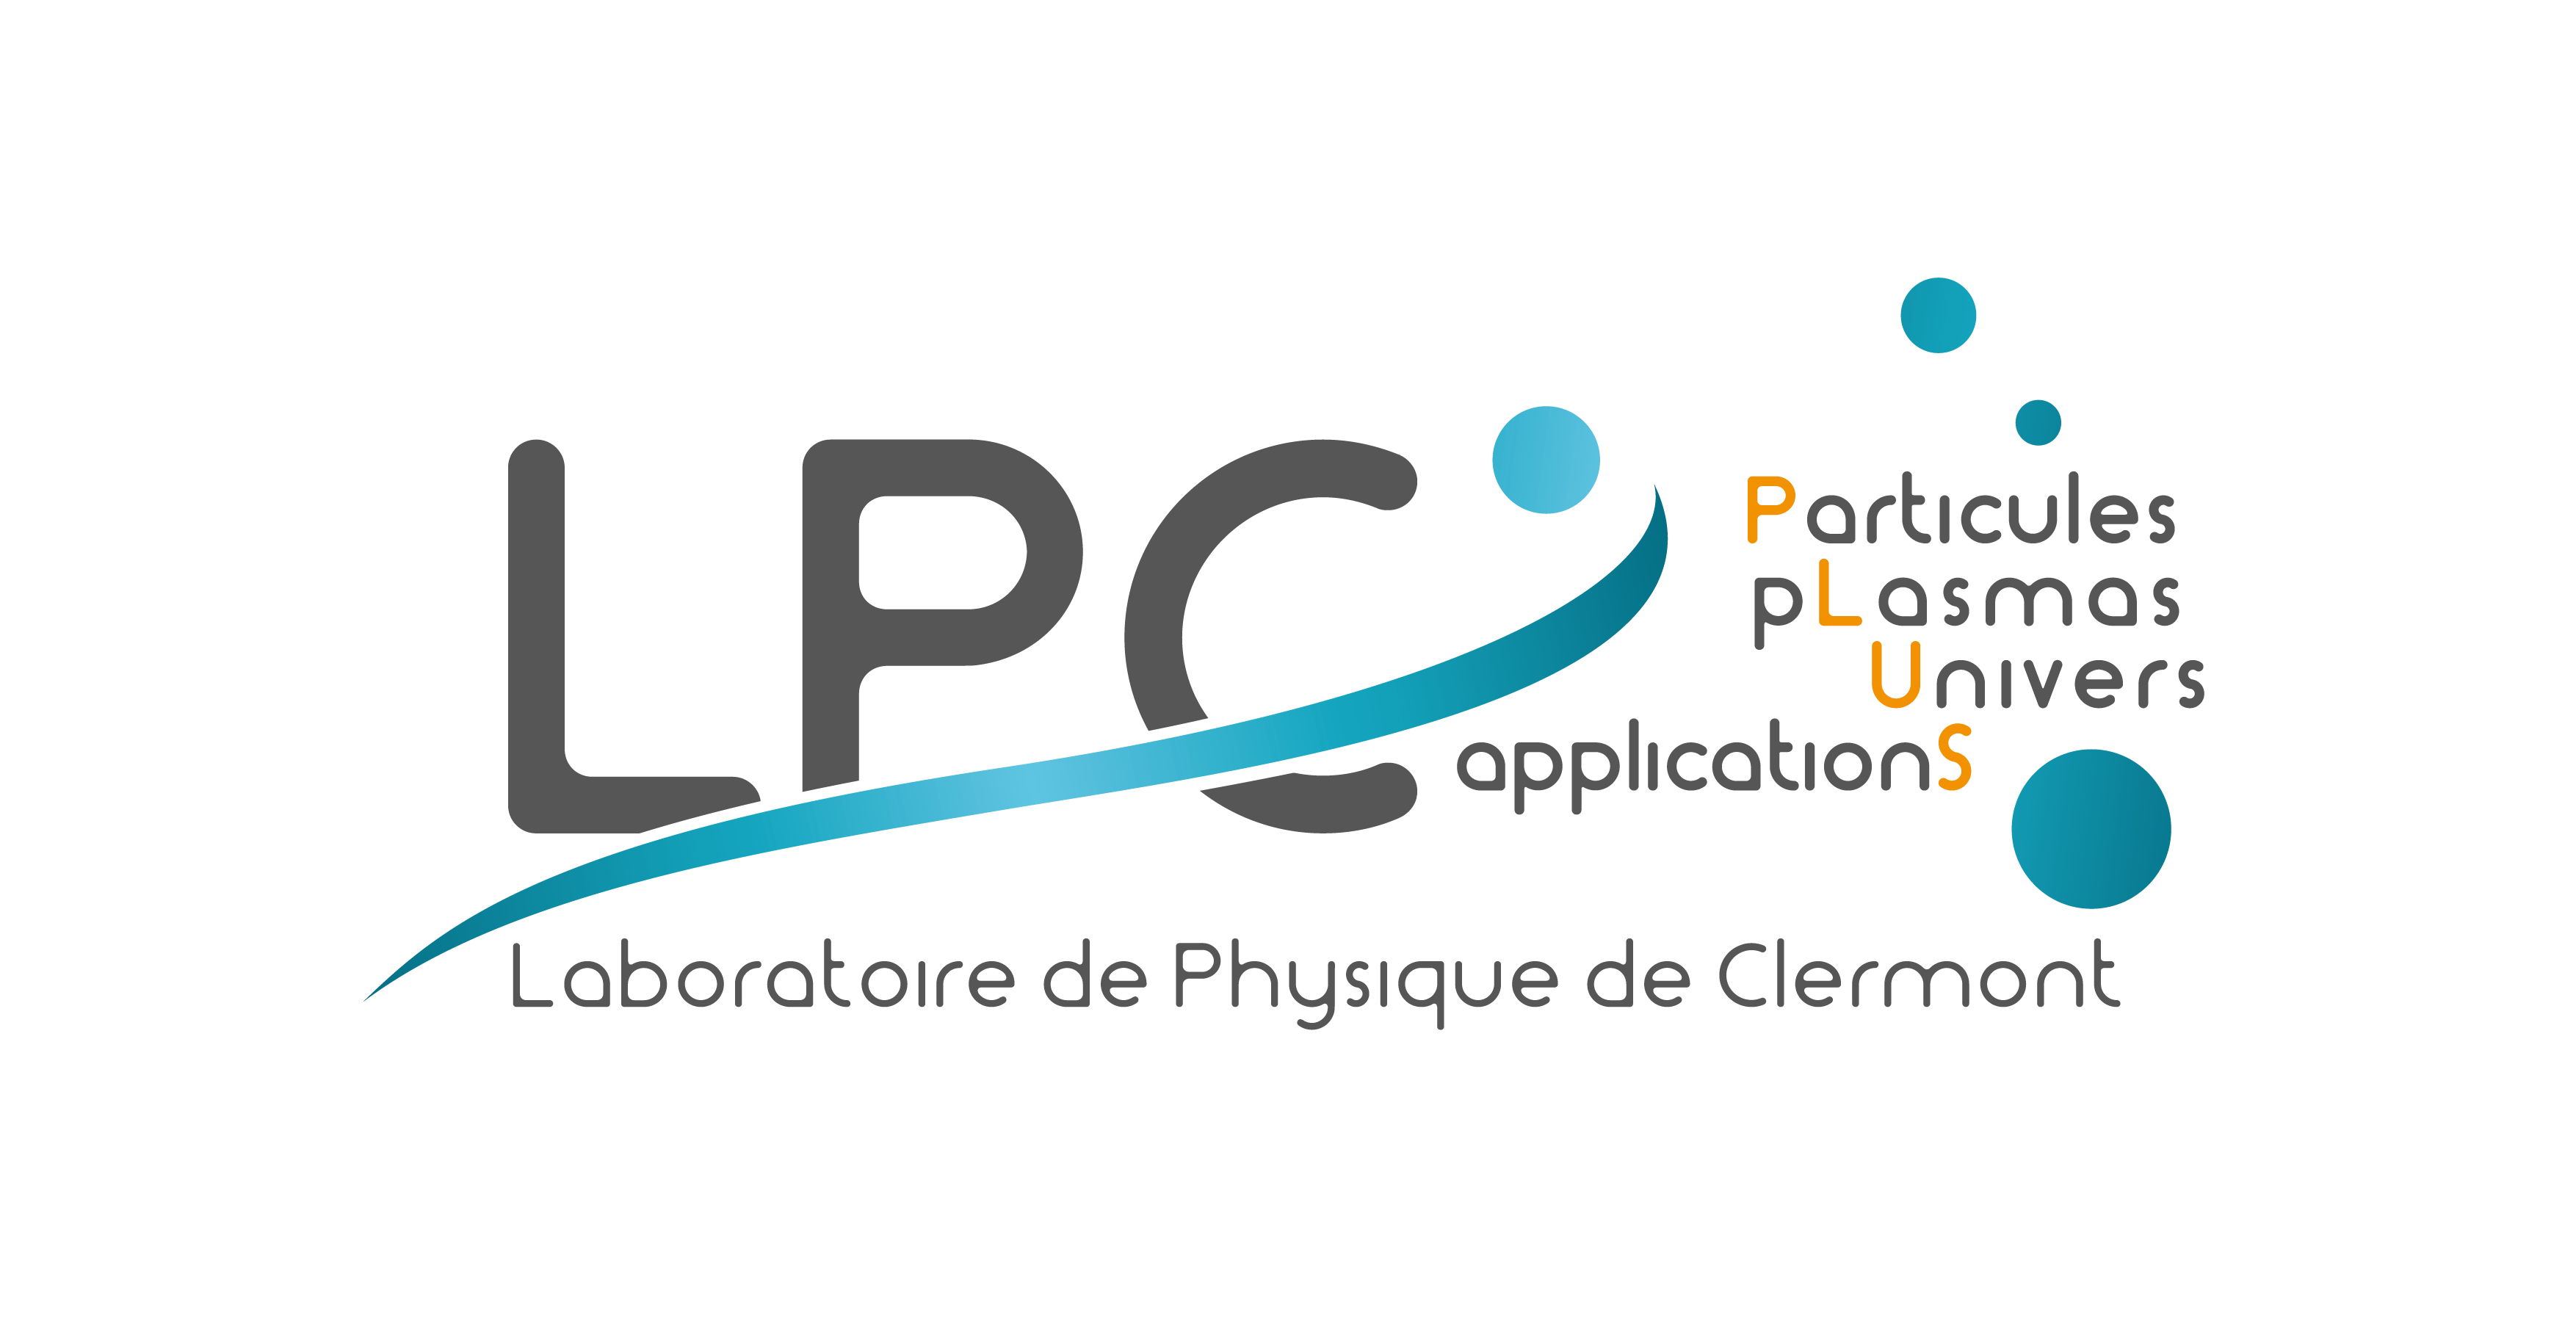 Permanent research position at LPC Clermont, France (deadline 8 January)